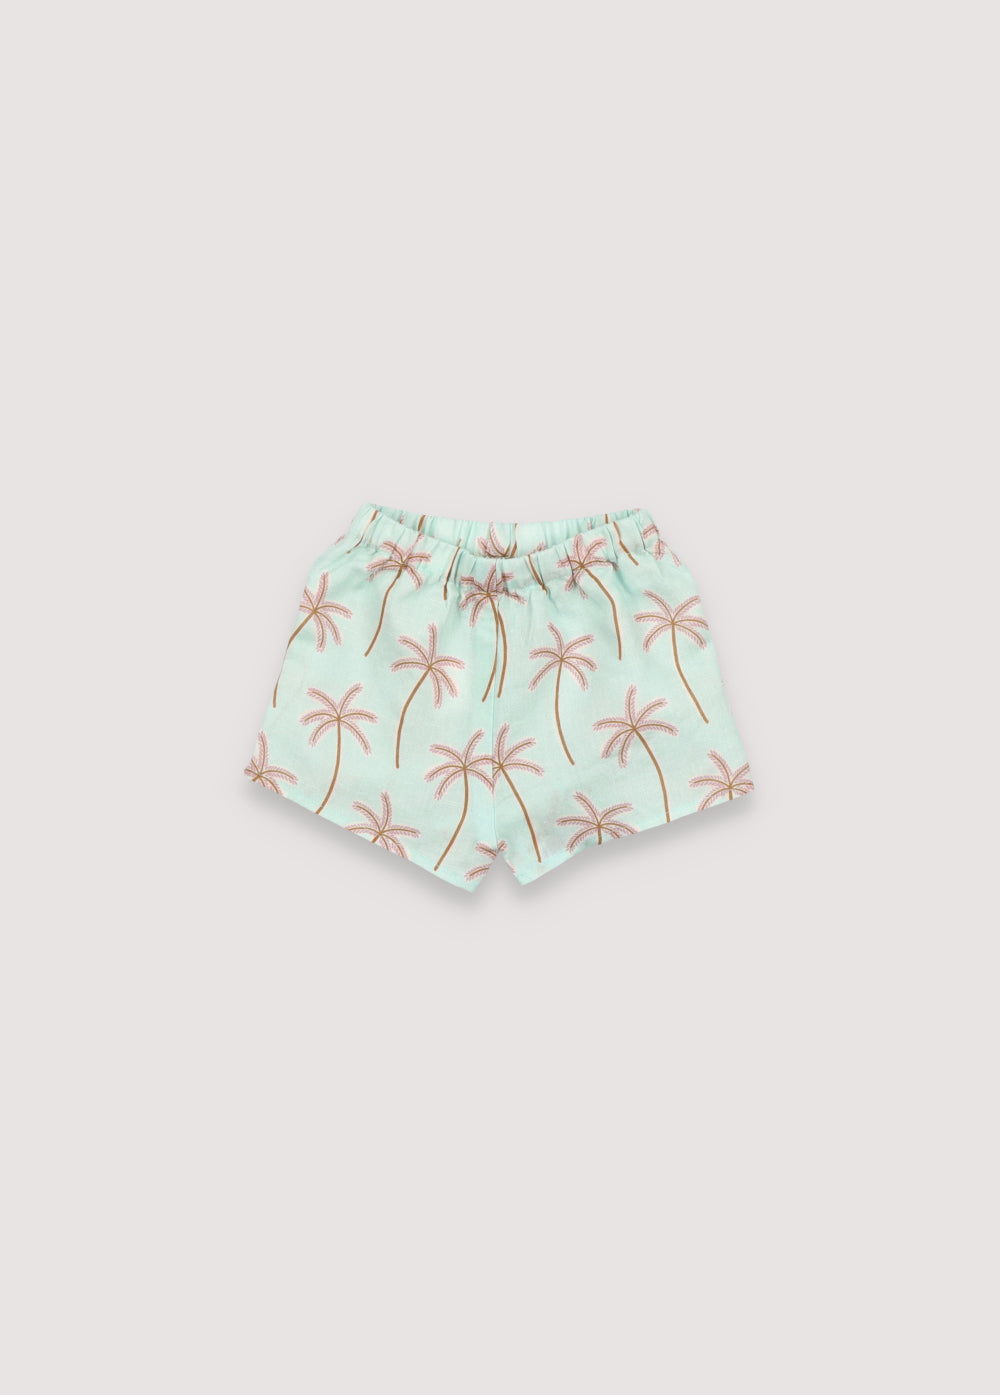 The New Society Palm Springs Baby Short - Palm Spring Print